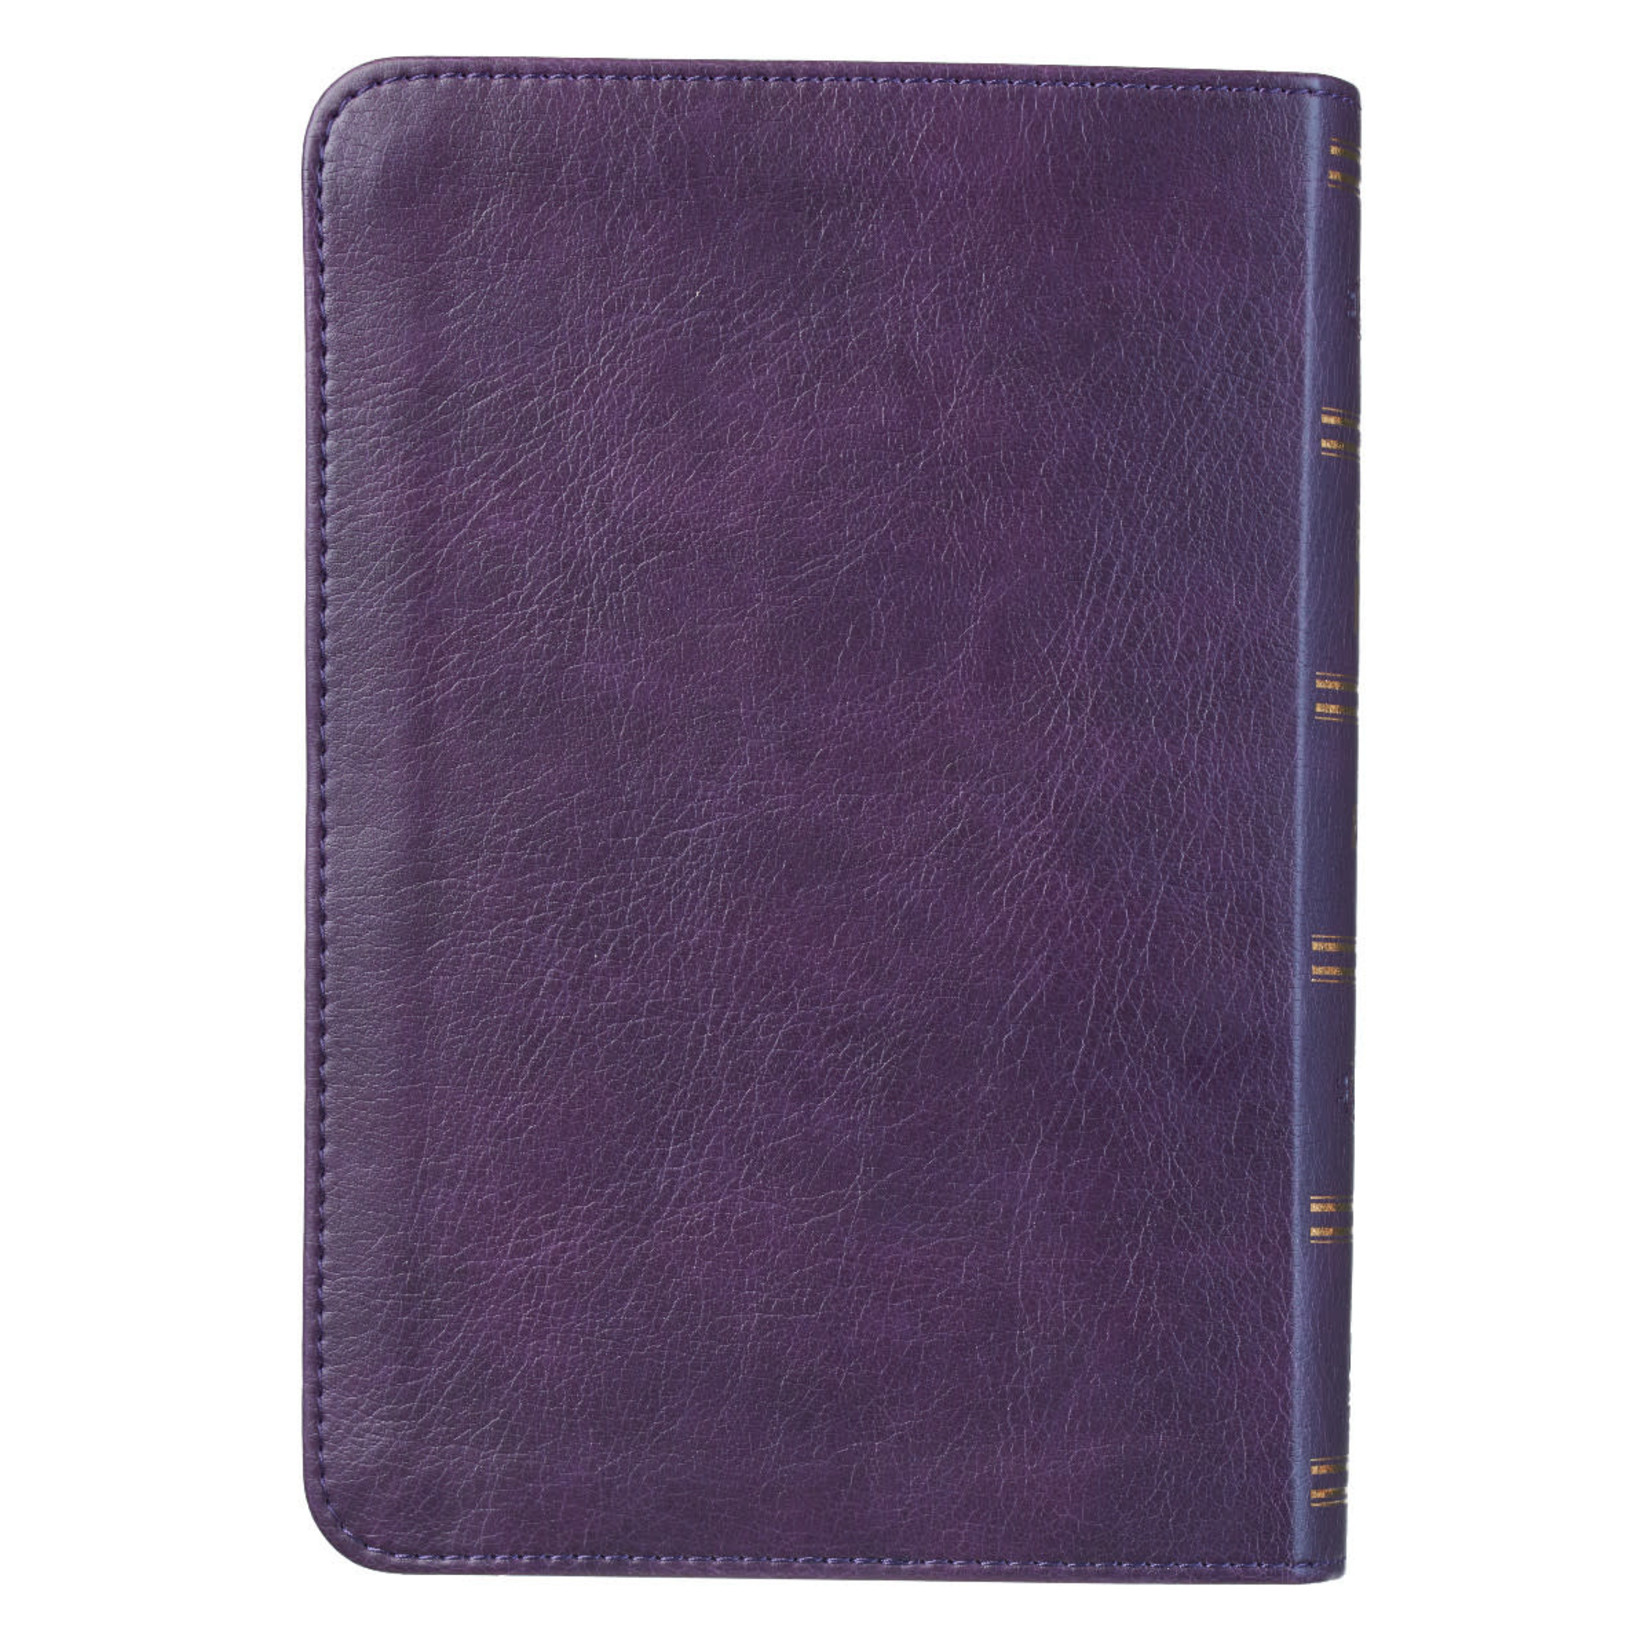 Christian Art Gifts Purple Faux Leather Large Print Compact King James Version Bible